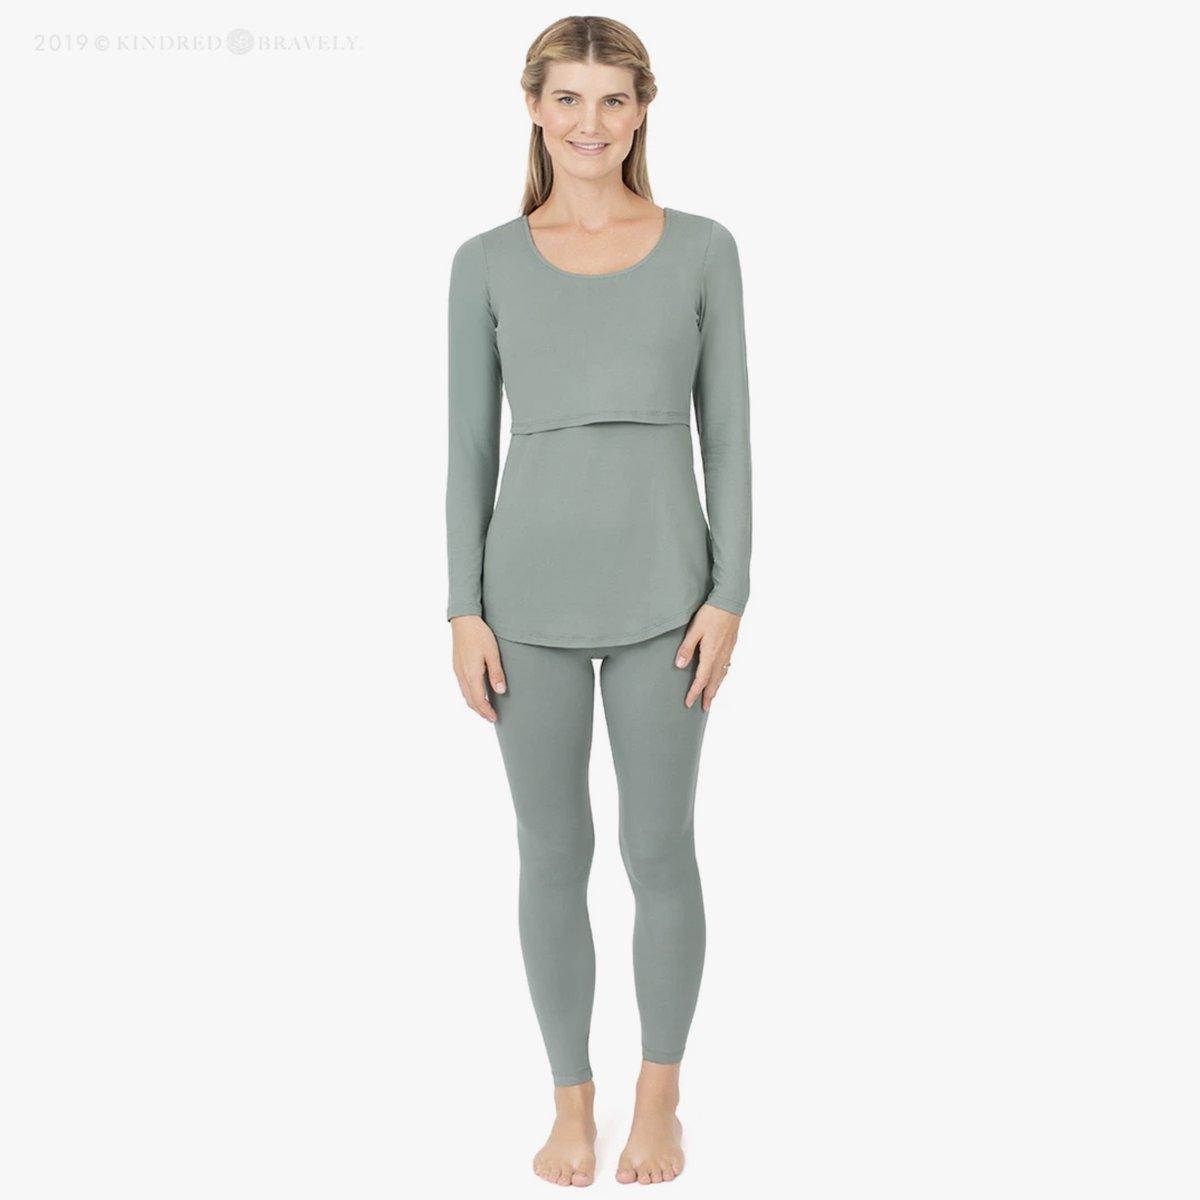 woman wearing green pajamas with an opening designed for breastfeeding